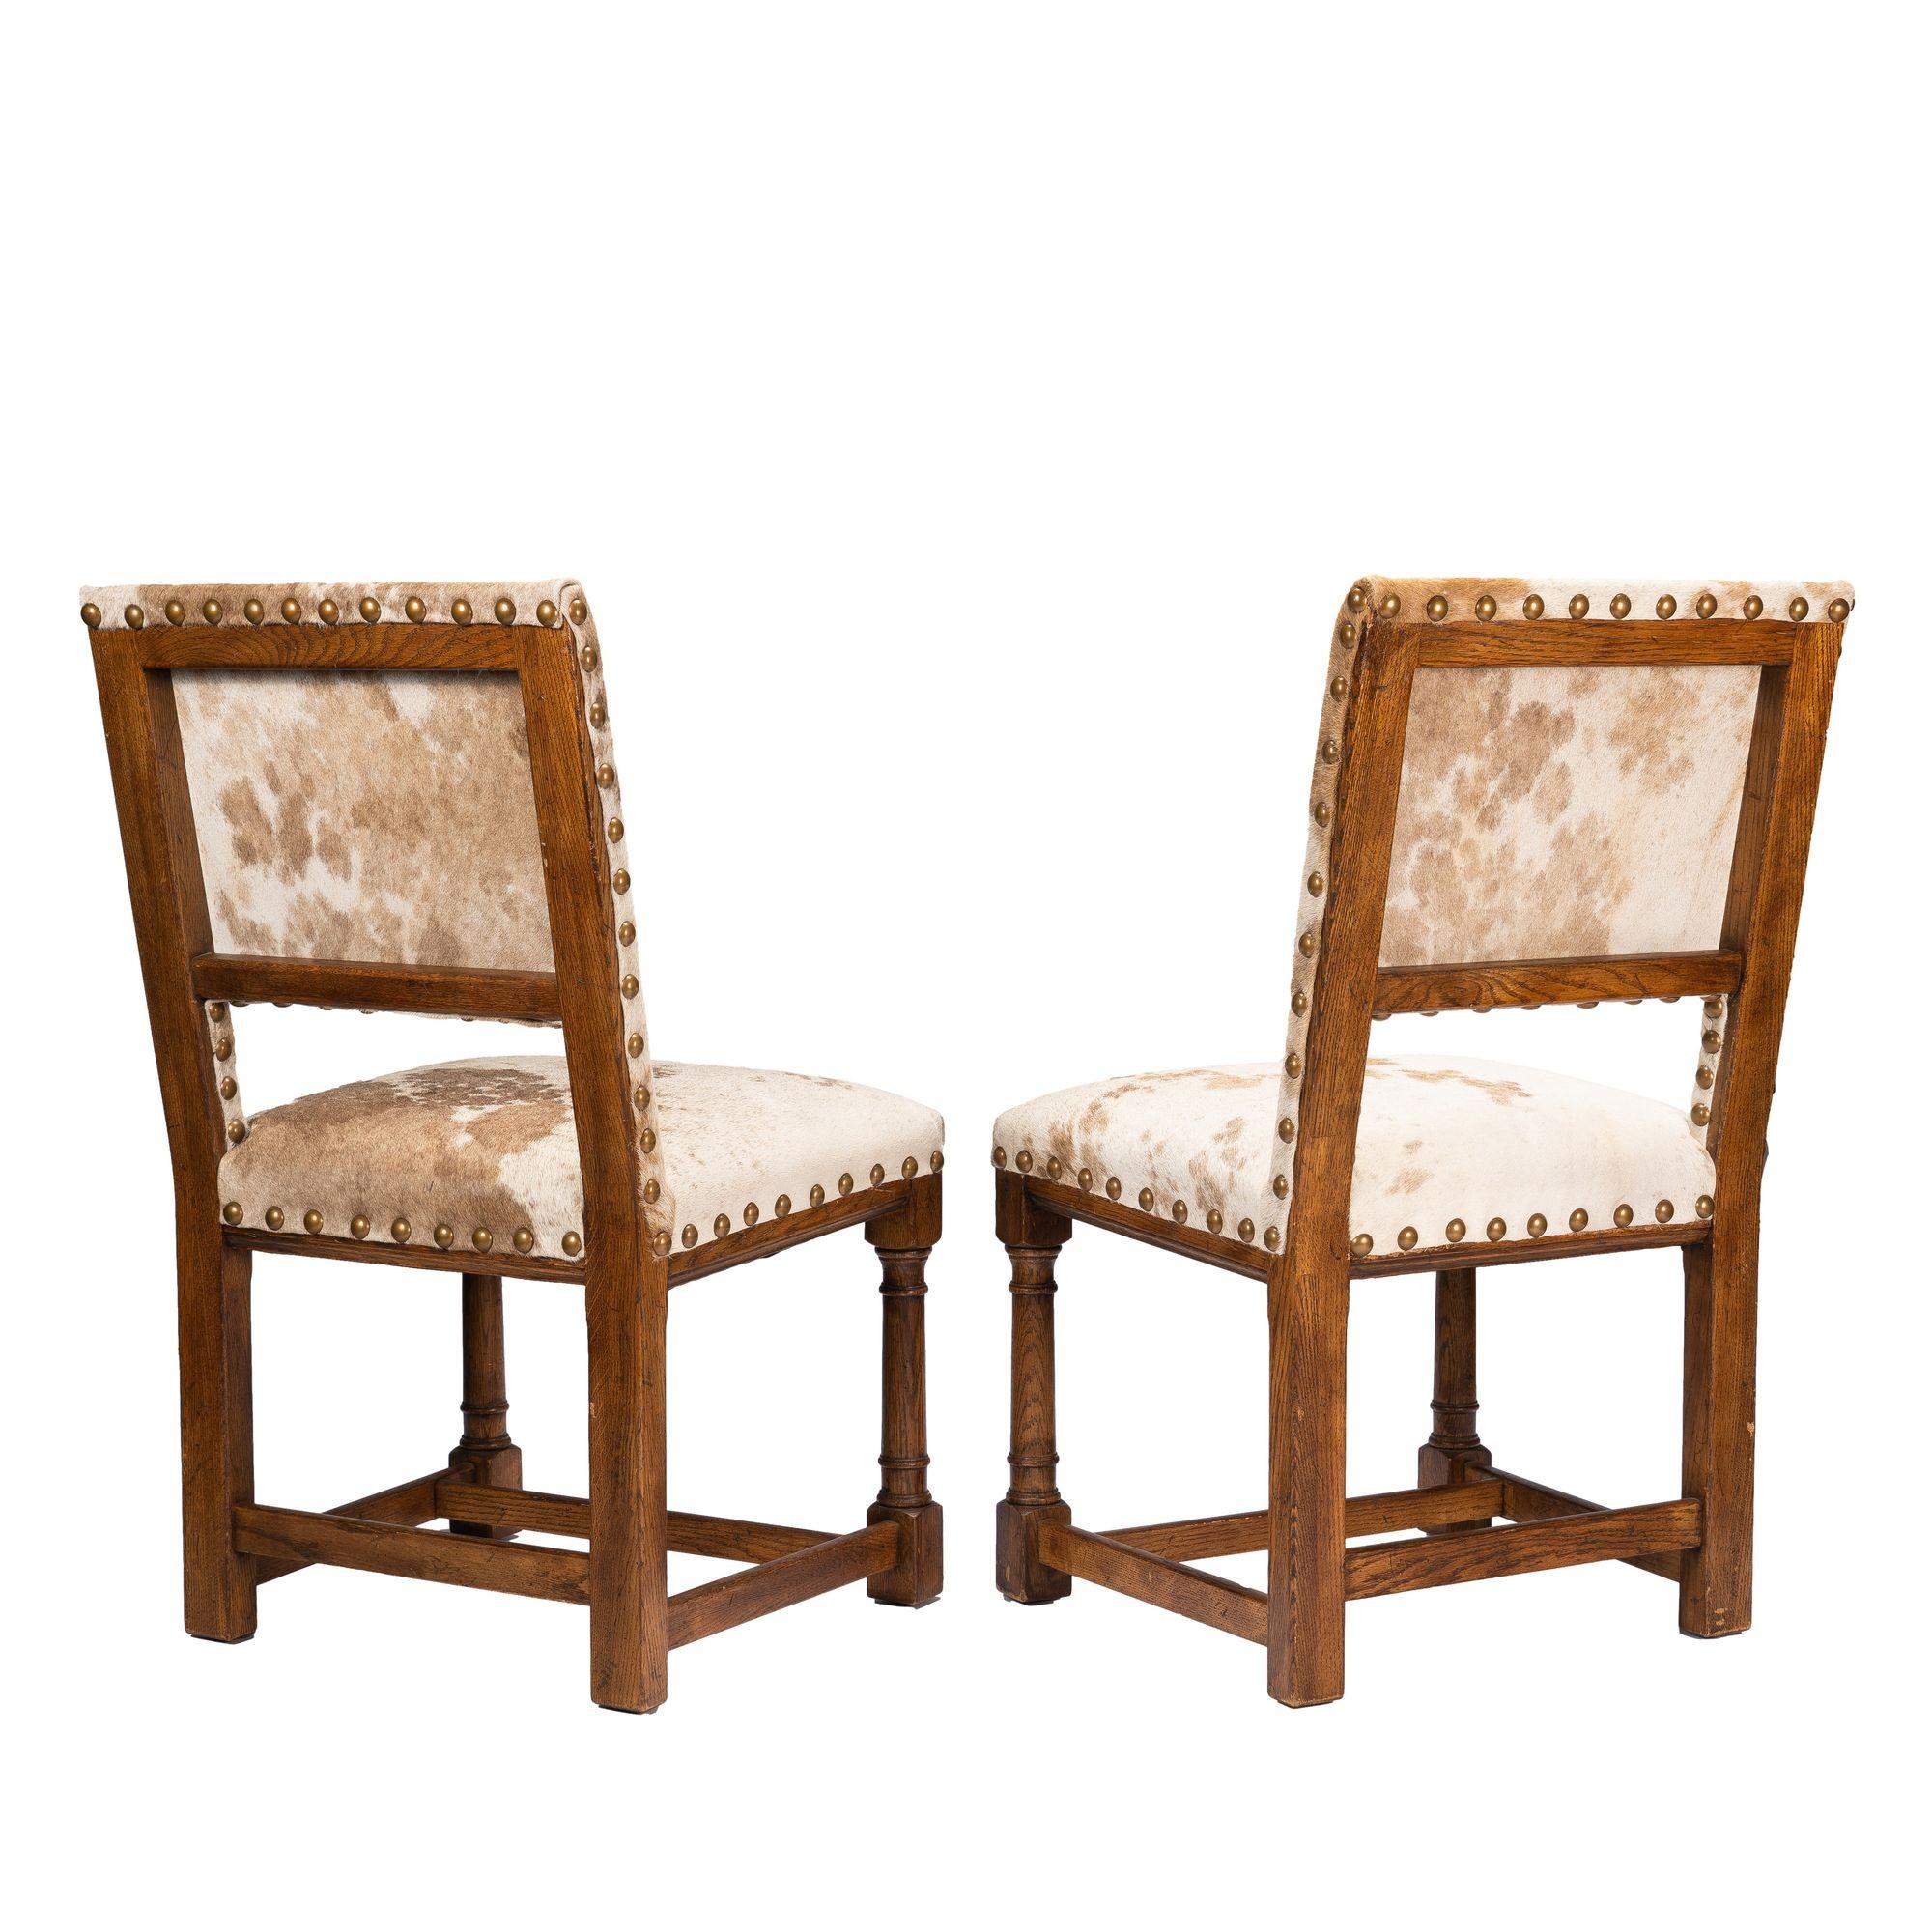 Pair of Jacobean style hair on hide oak side chairs, 1920-35 In Excellent Condition For Sale In Kenilworth, IL